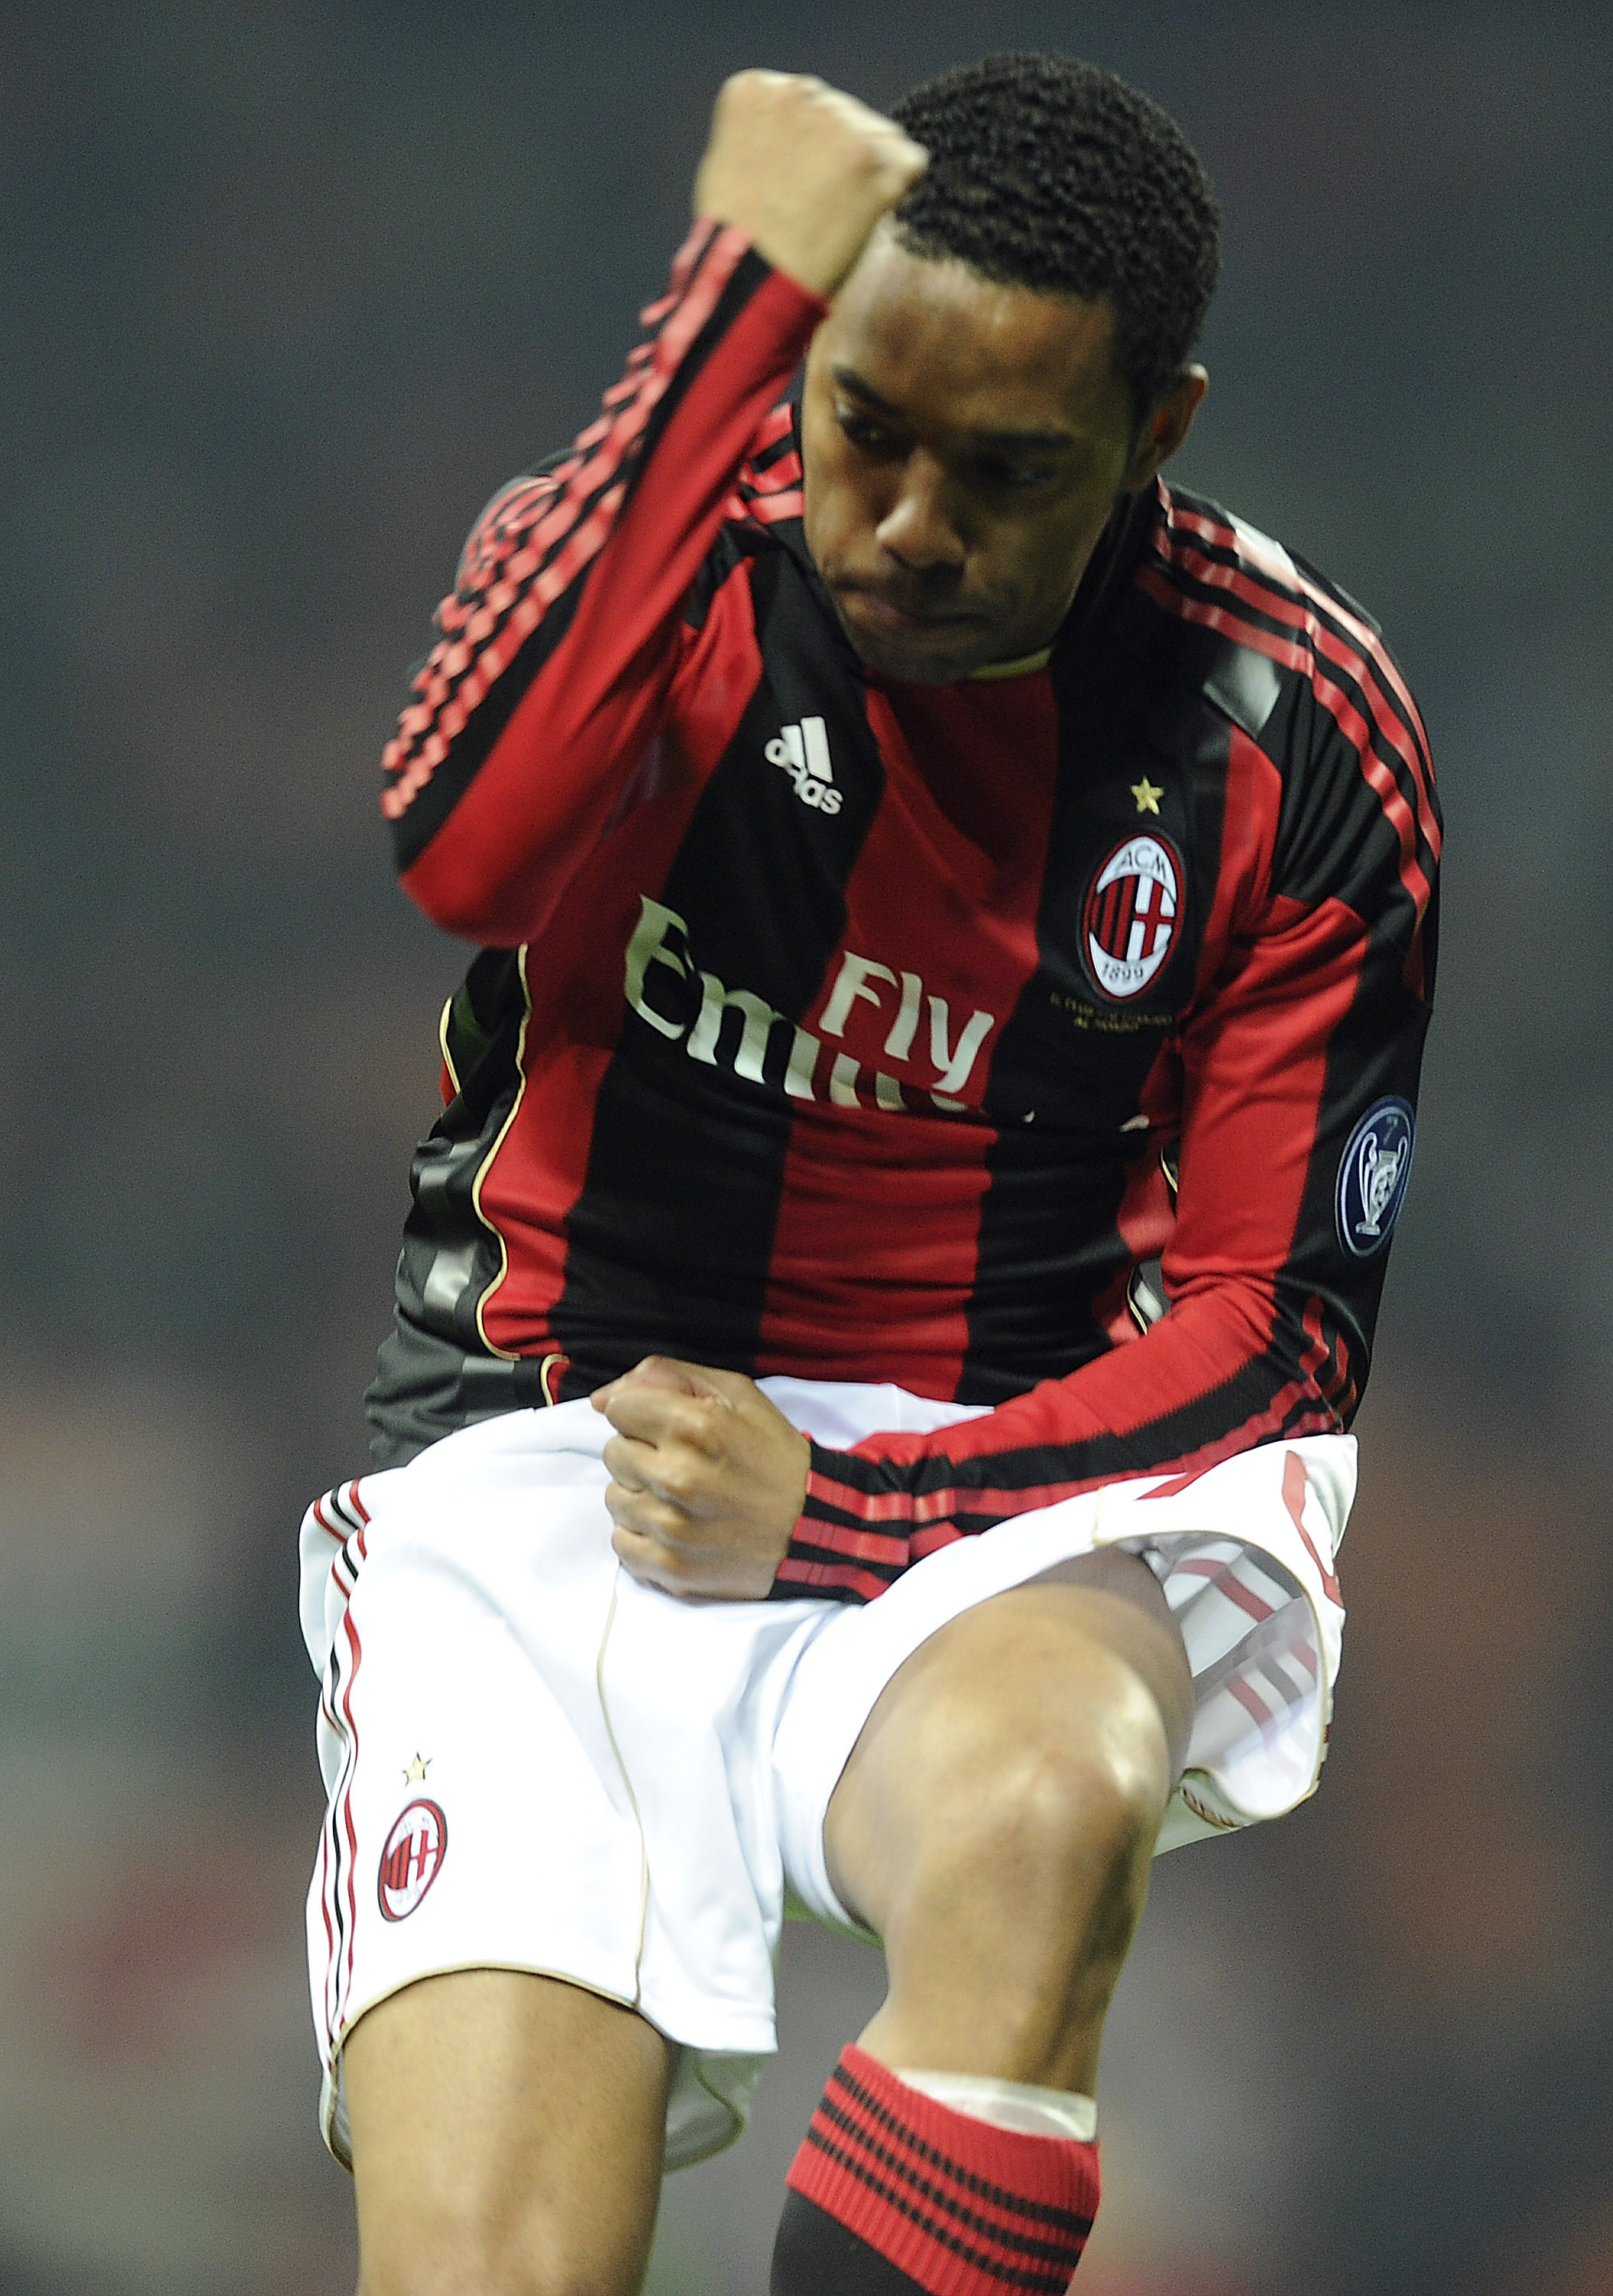 MILAN, ITALY - FEBRUARY 12:  Robinho of Milan celebrate after scoring his team's goal during the Serie A match between AC Milan and Parma FC at Stadio Giuseppe Meazza on February 12, 2011 in Milan, Italy.  (Photo by Dino Panato/Getty Images)